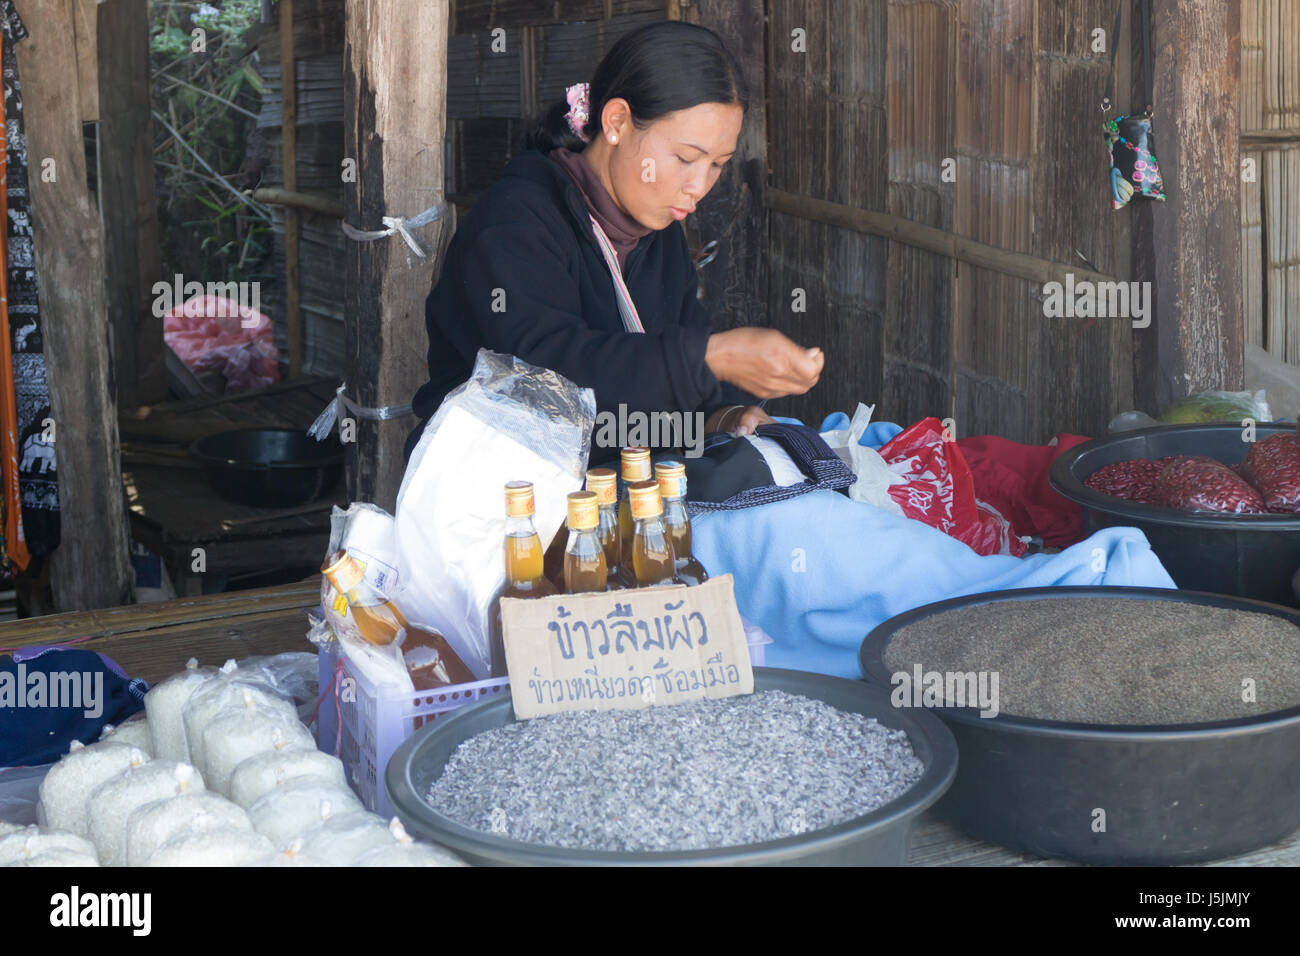 Hill tribe goods and produce for sale in Chiang Mai province, Thailand Stock Photo